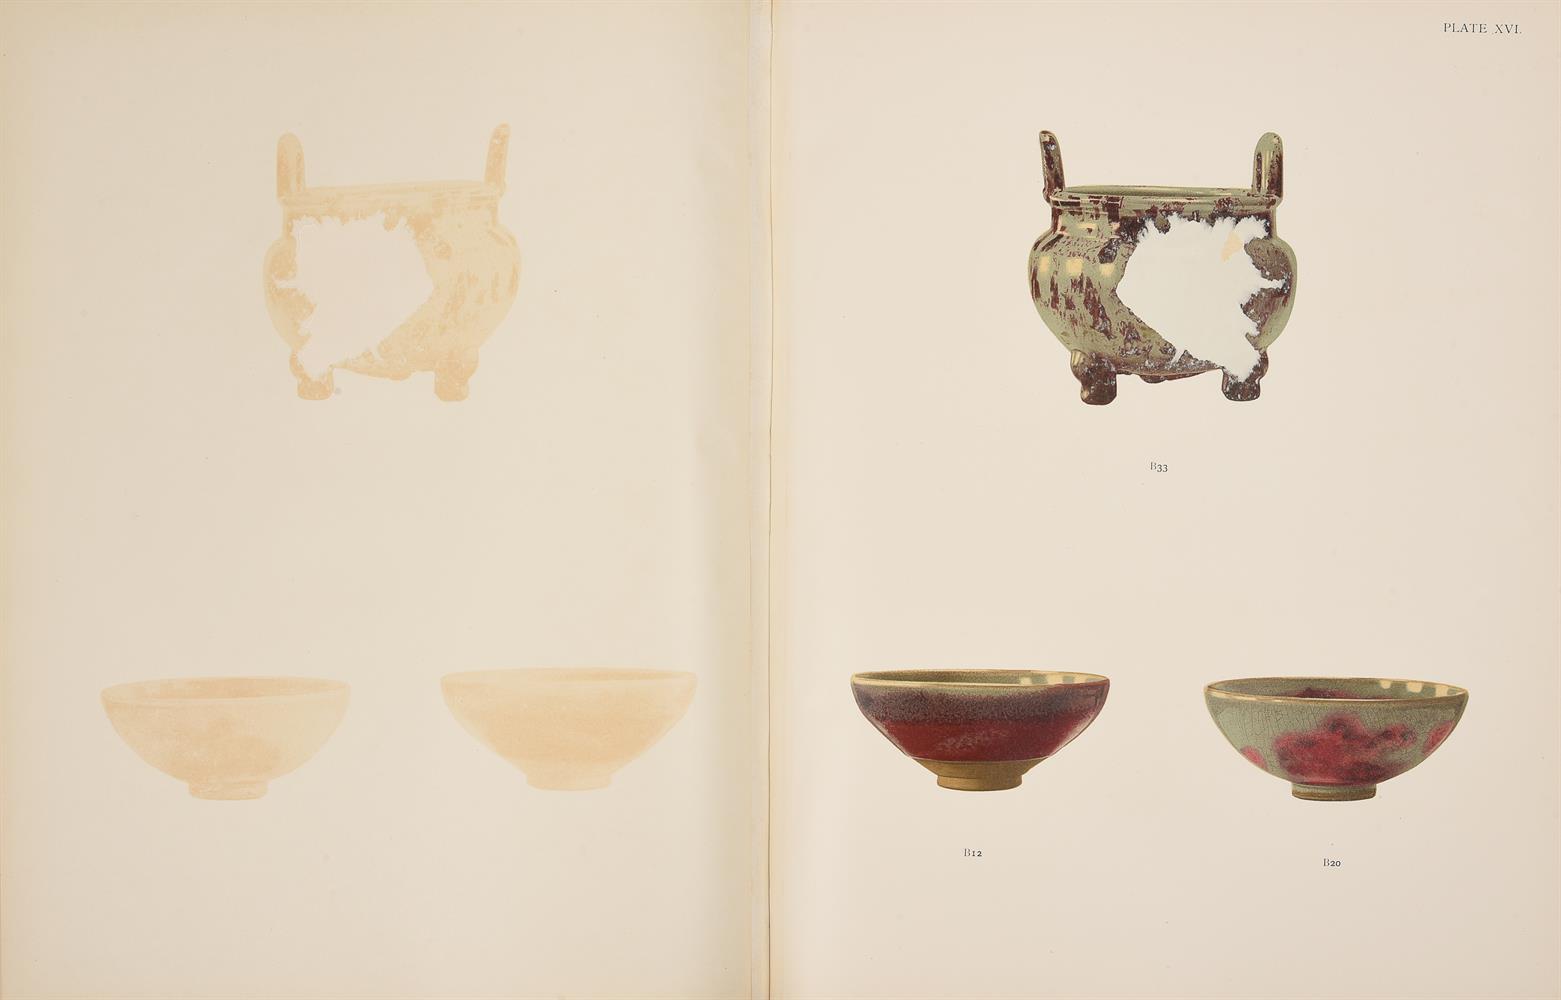 Ɵ Burlington Fine Arts Club, Illustrated Catalogue of Early Chinese Pottery and Porcelain - Image 6 of 6